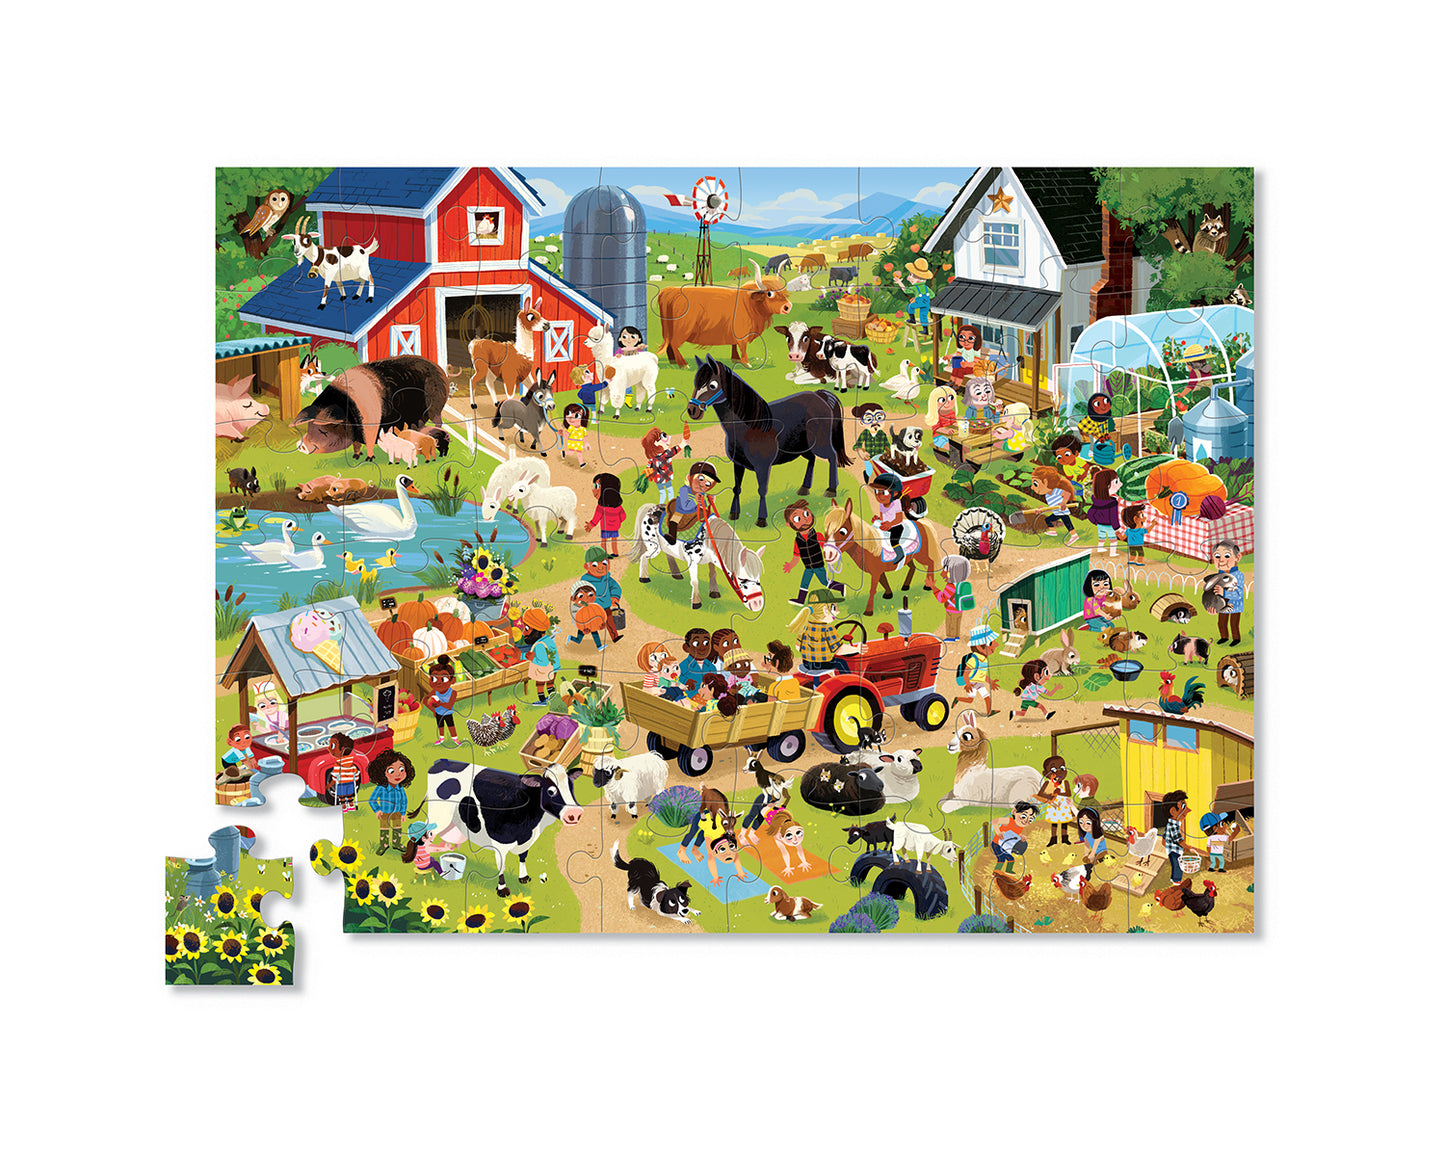 Day at the Museum Puzzle 48 pc- Farm